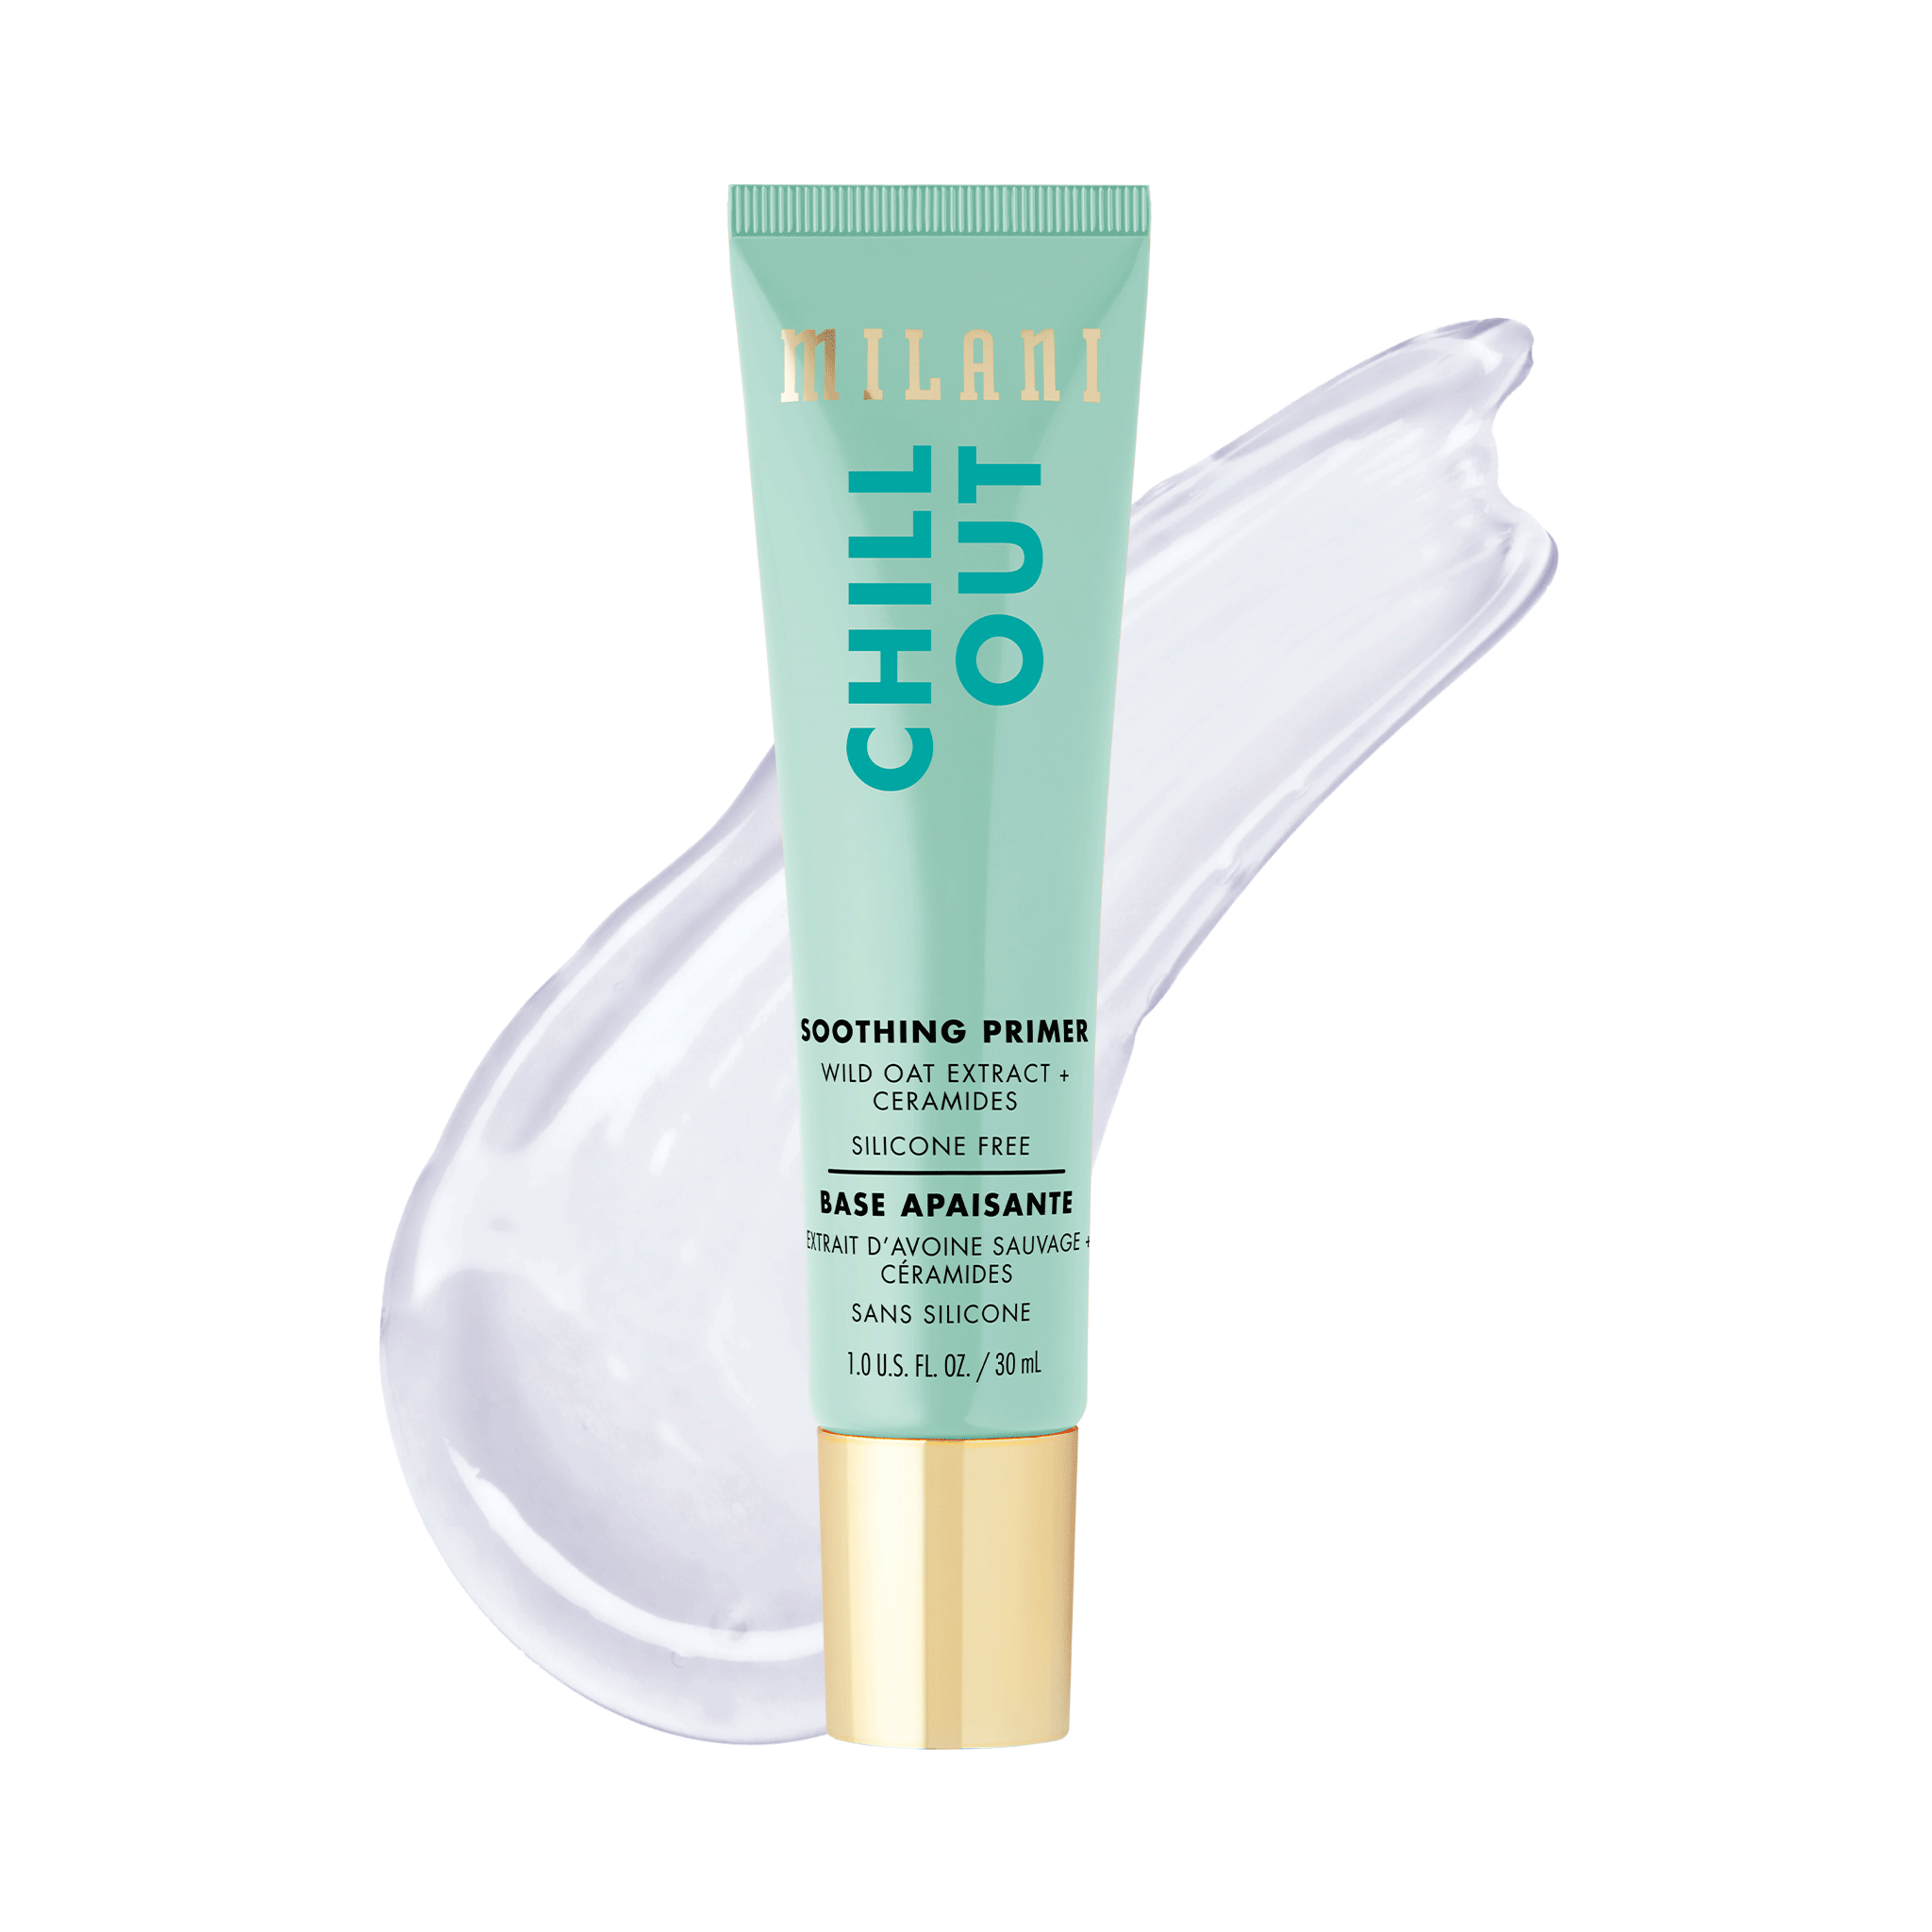 Bilde av Milani Chill Out Face Primer 150 Soothing & Silicone Free 30 Ml